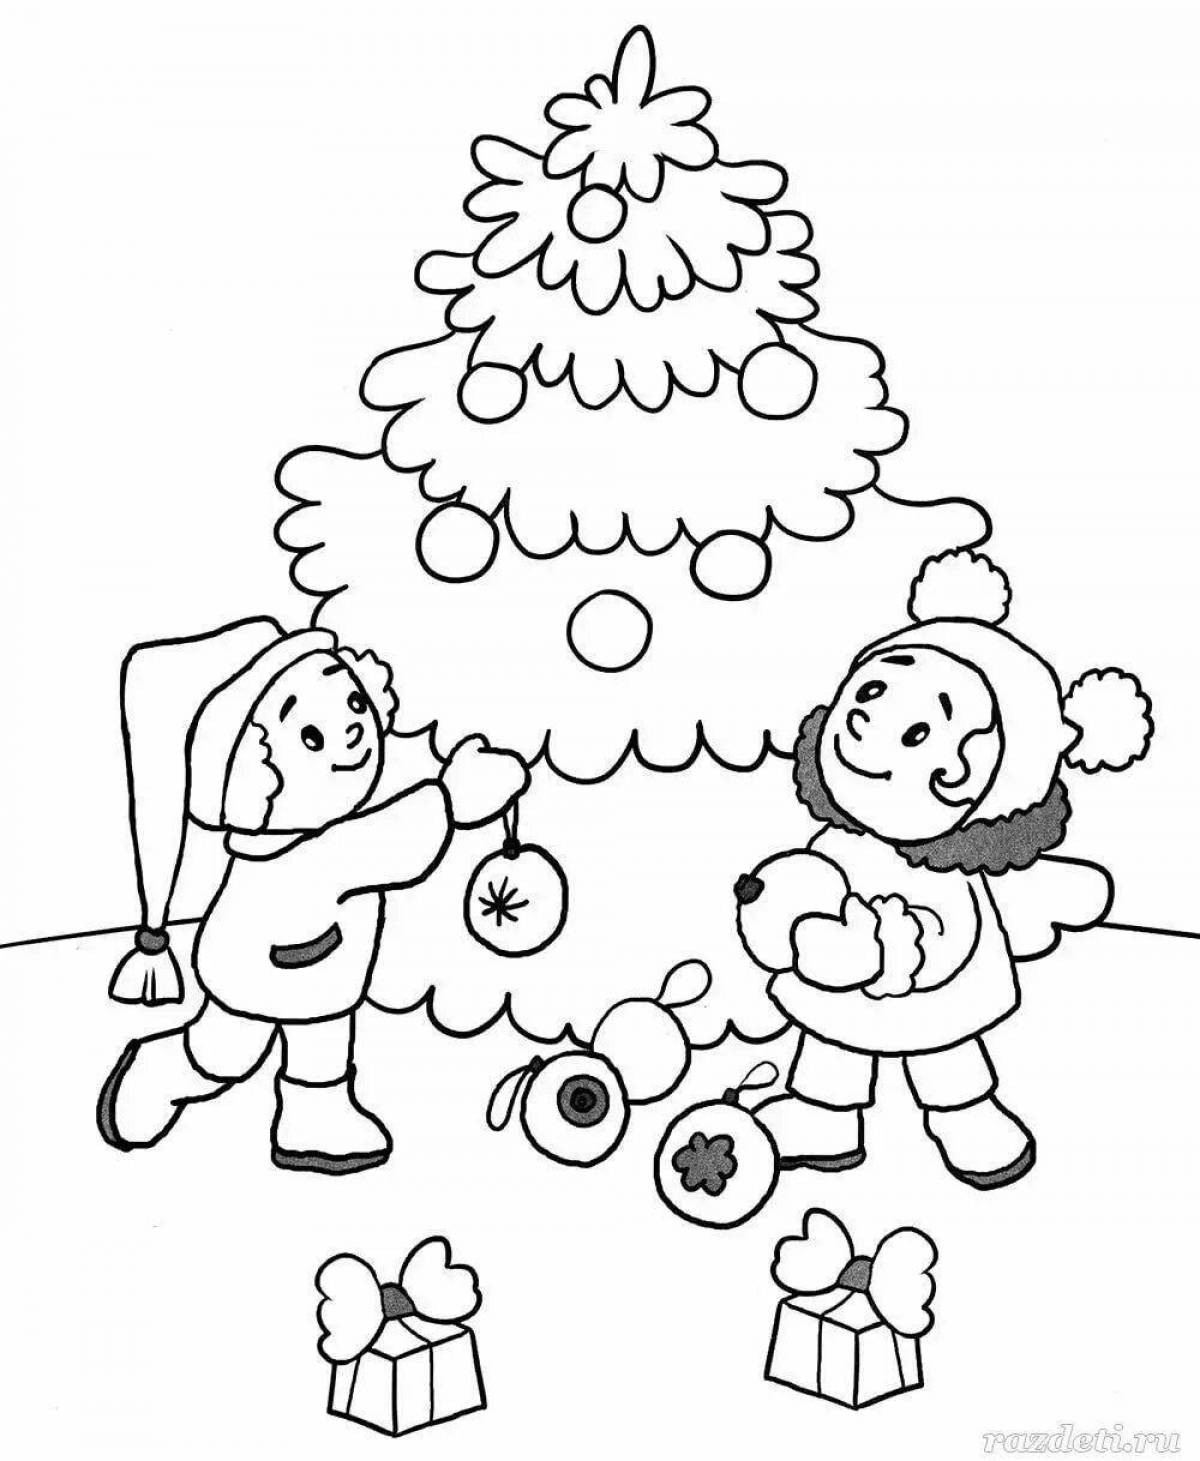 Large Christmas coloring book for children 6-7 years old